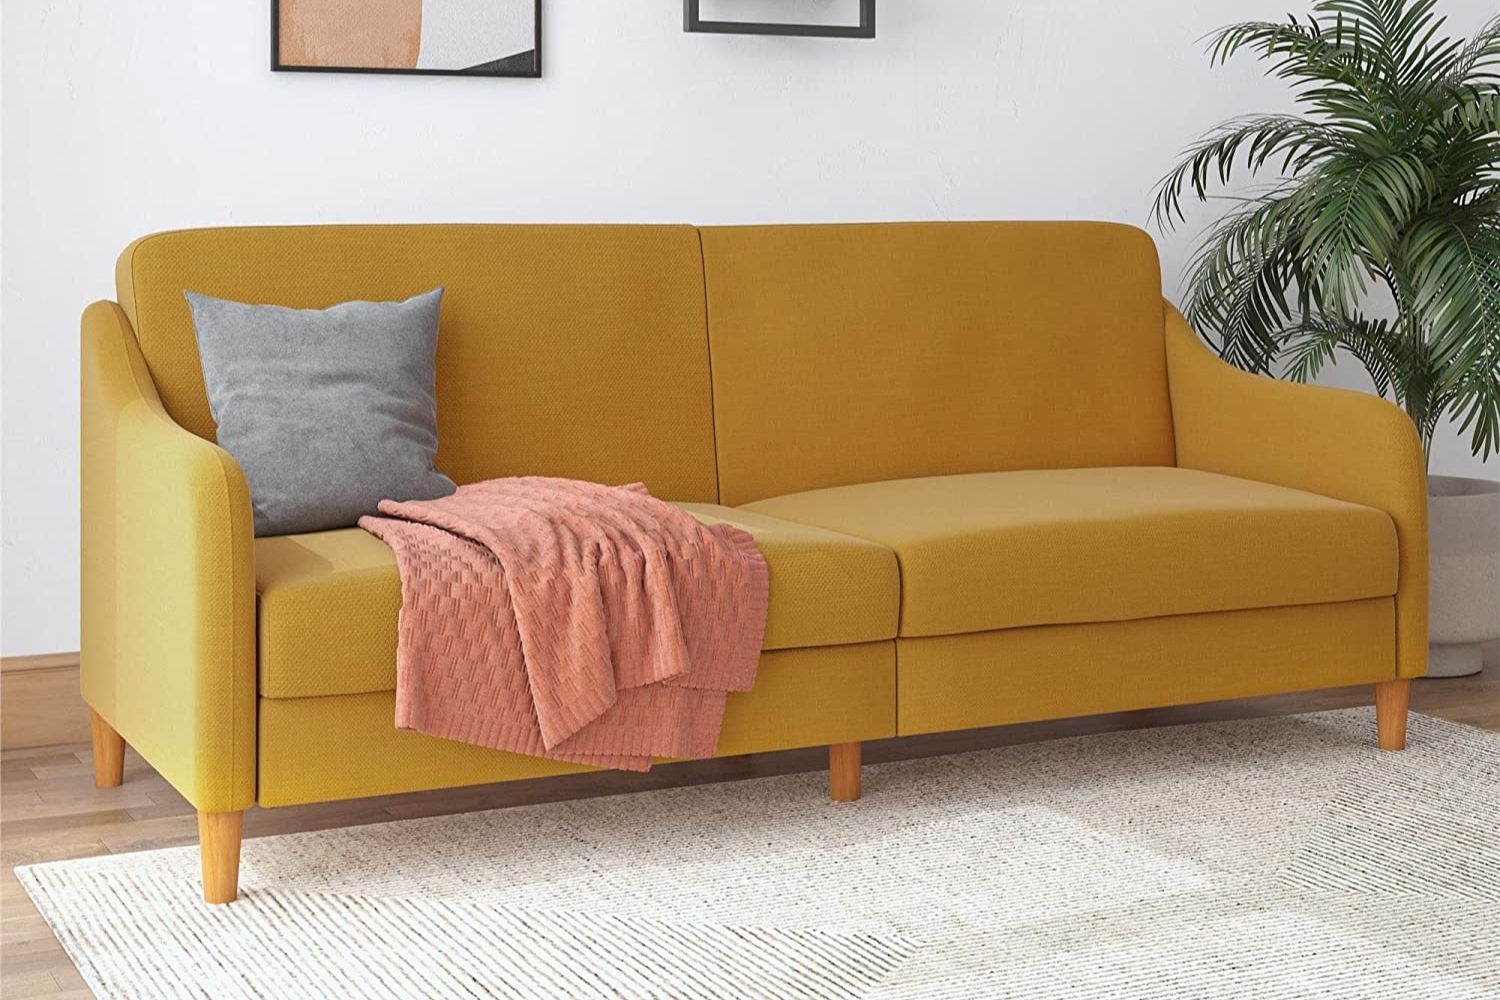 The Best Couches Under 1000 Options: IKEA Kivik Sofa